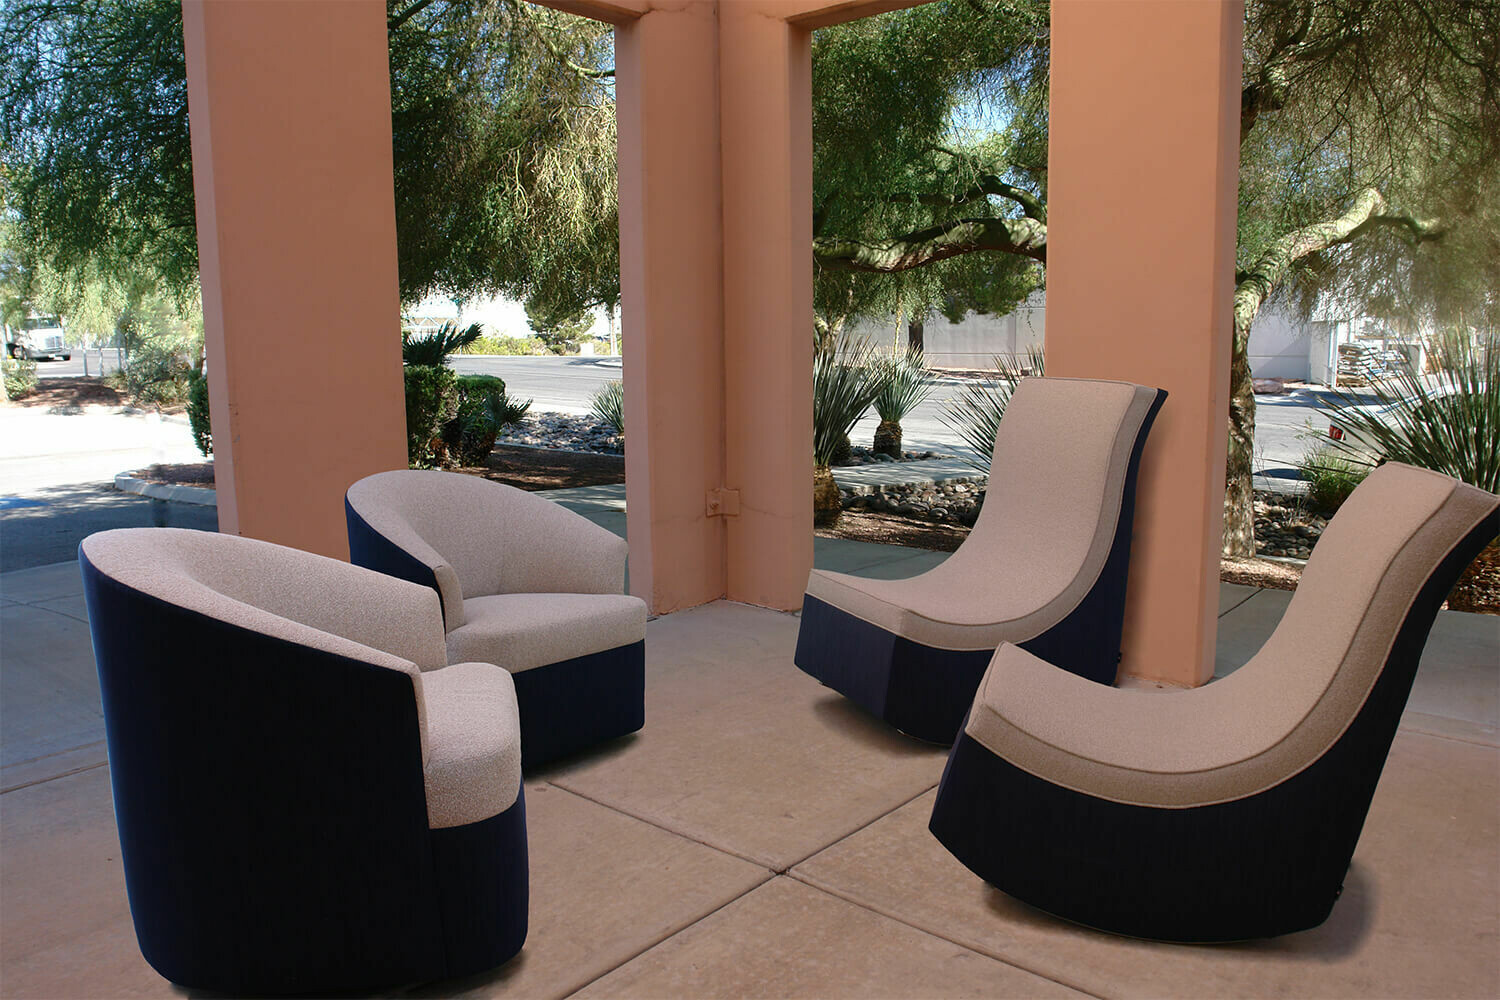 Resort Style 4 piece Chair Set-2 Rocking Lounge Chairs & 2 Swivel Chairs